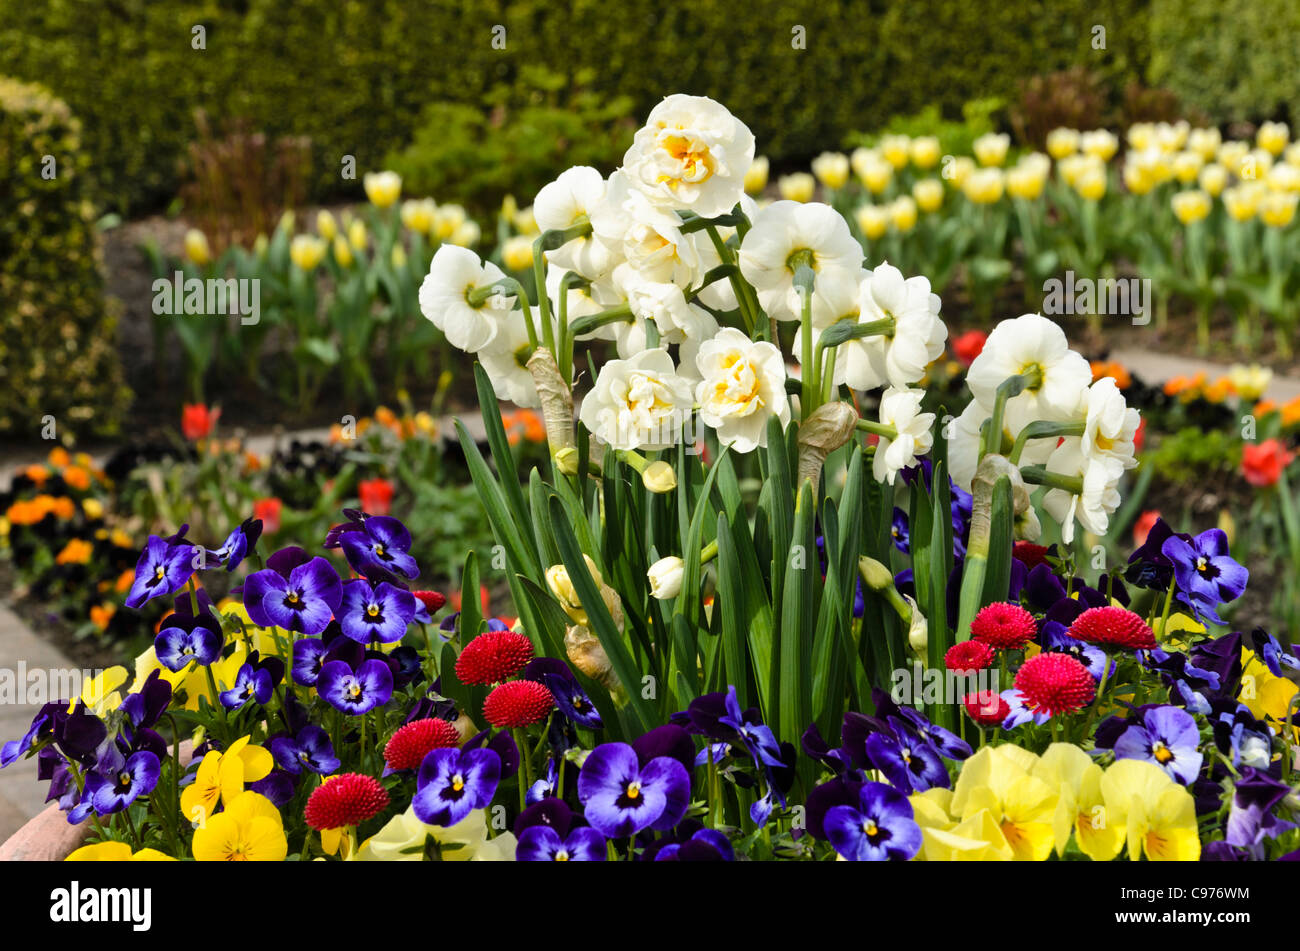 Double daffodil (Narcissus Bridal Crown), horned pansy (Viola cornuta) and common daisy (Bellis perennis) Stock Photo